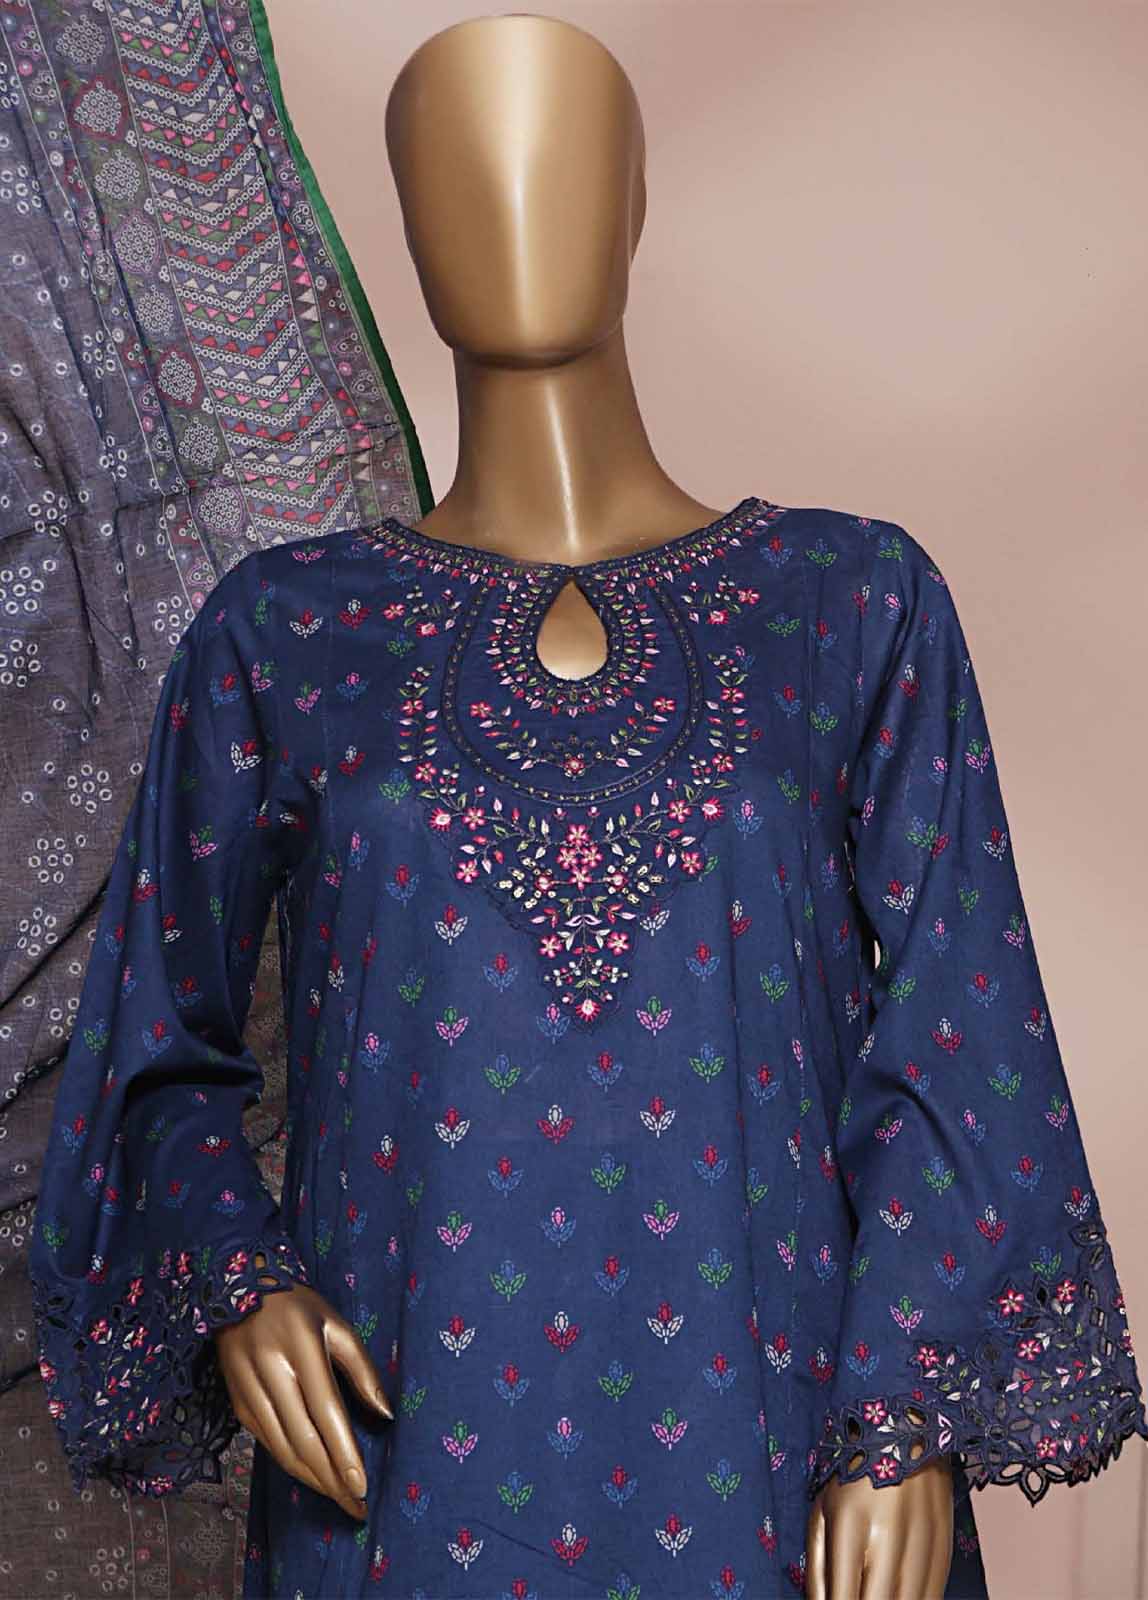 SMLE-0625-FR- 3 Piece Embroidered Stitched Suit